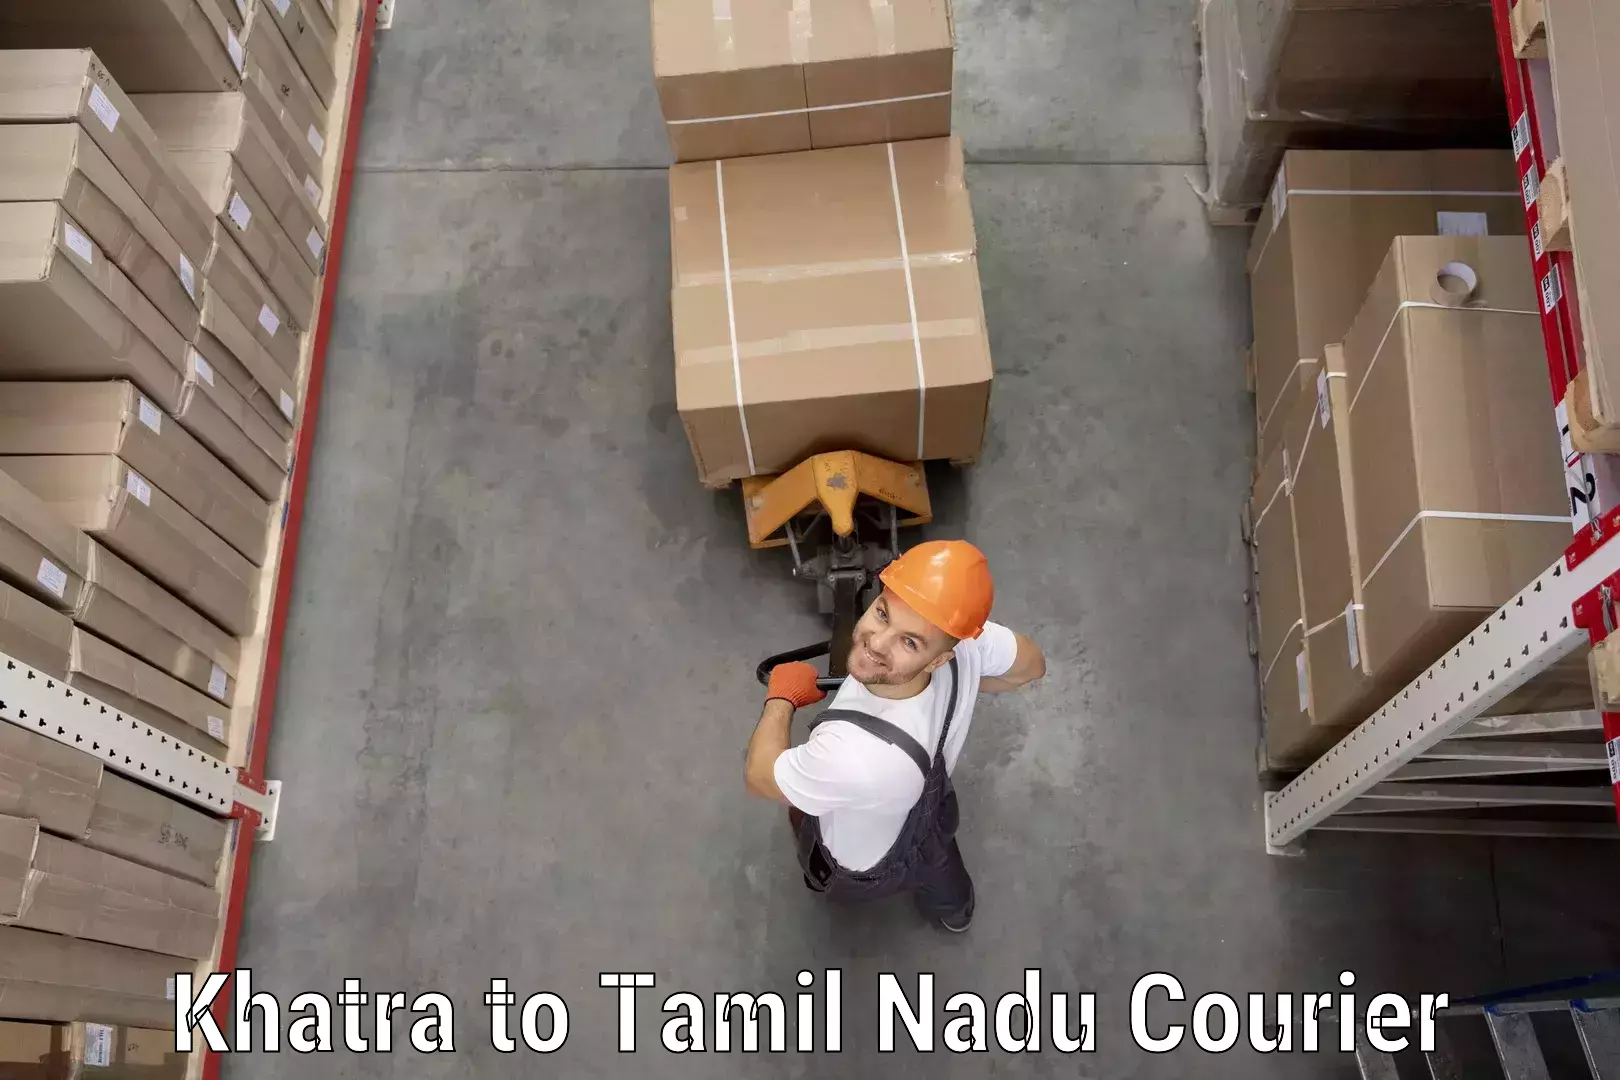 Multi-national courier services Khatra to Meenakshi Academy of Higher Education and Research Chennai